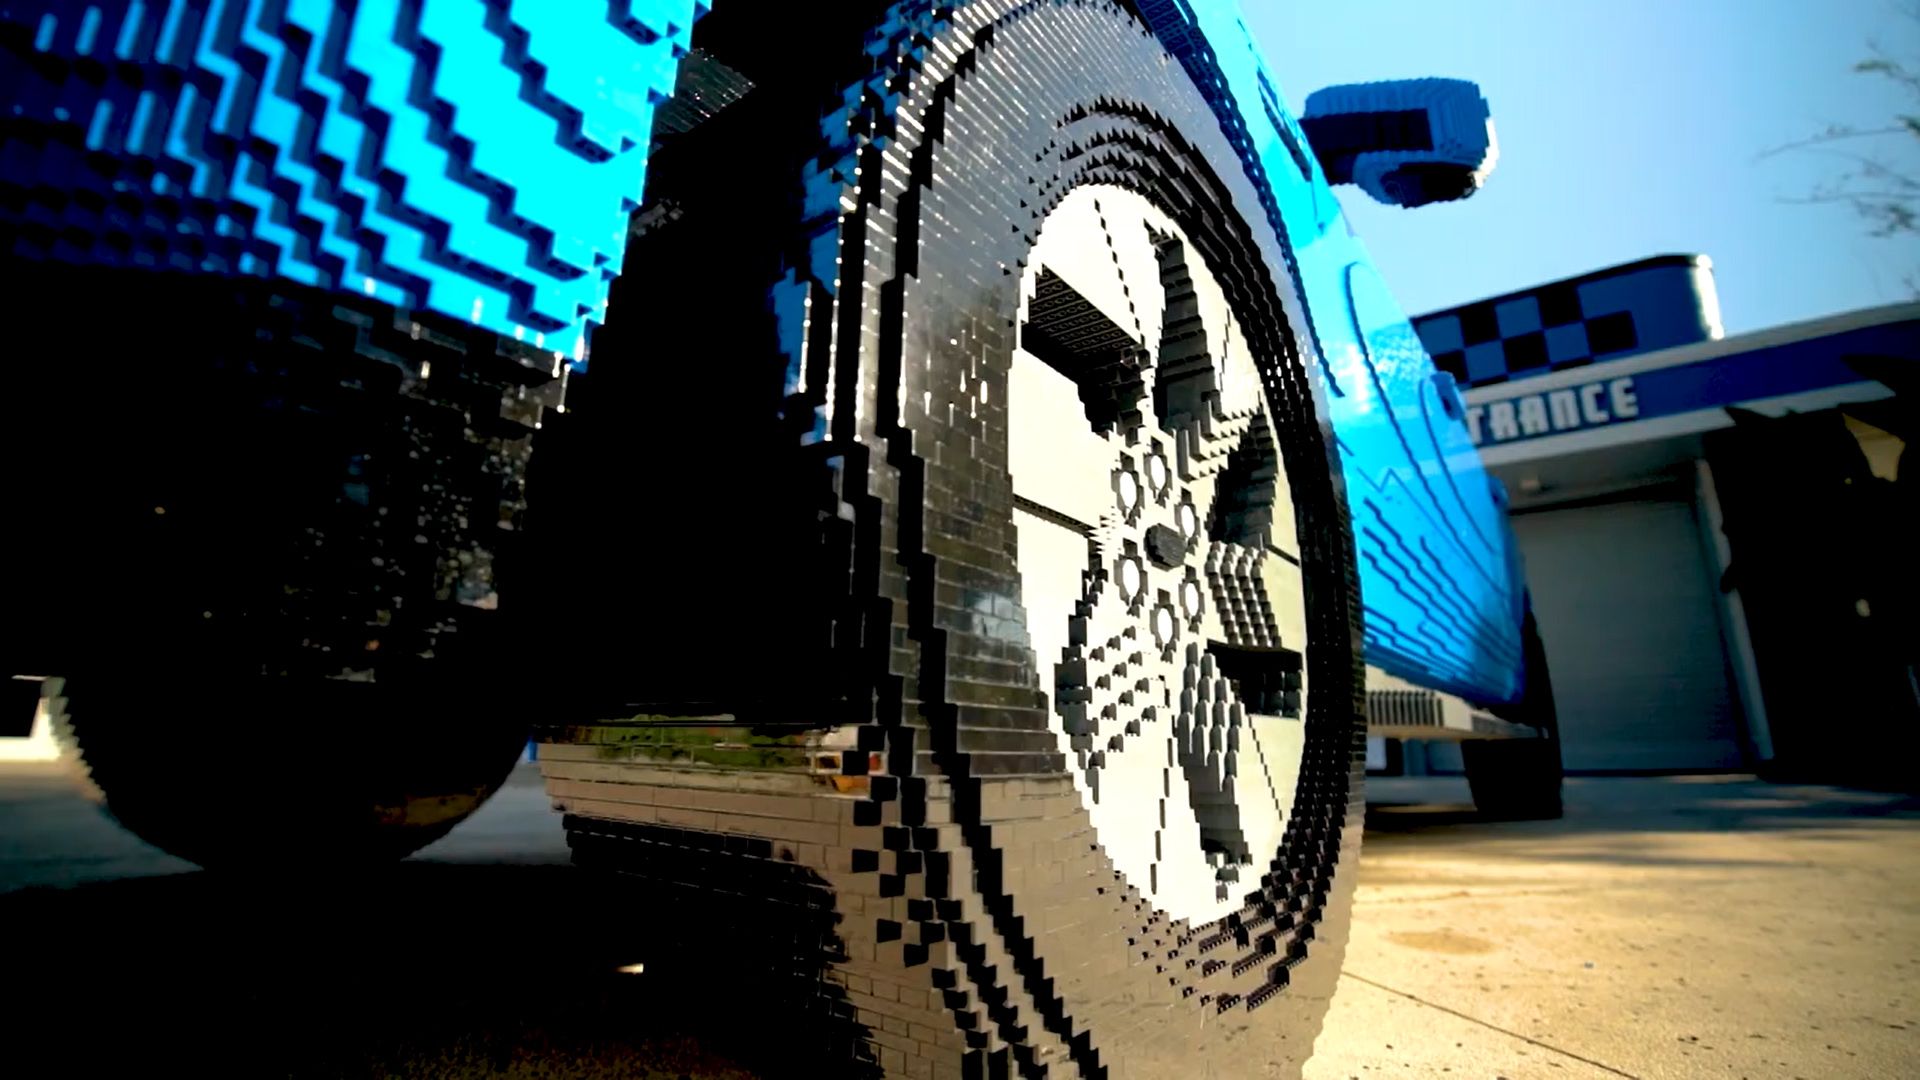 The World's First AllElectric LifeSize Lego Vehcile, A Ford F150